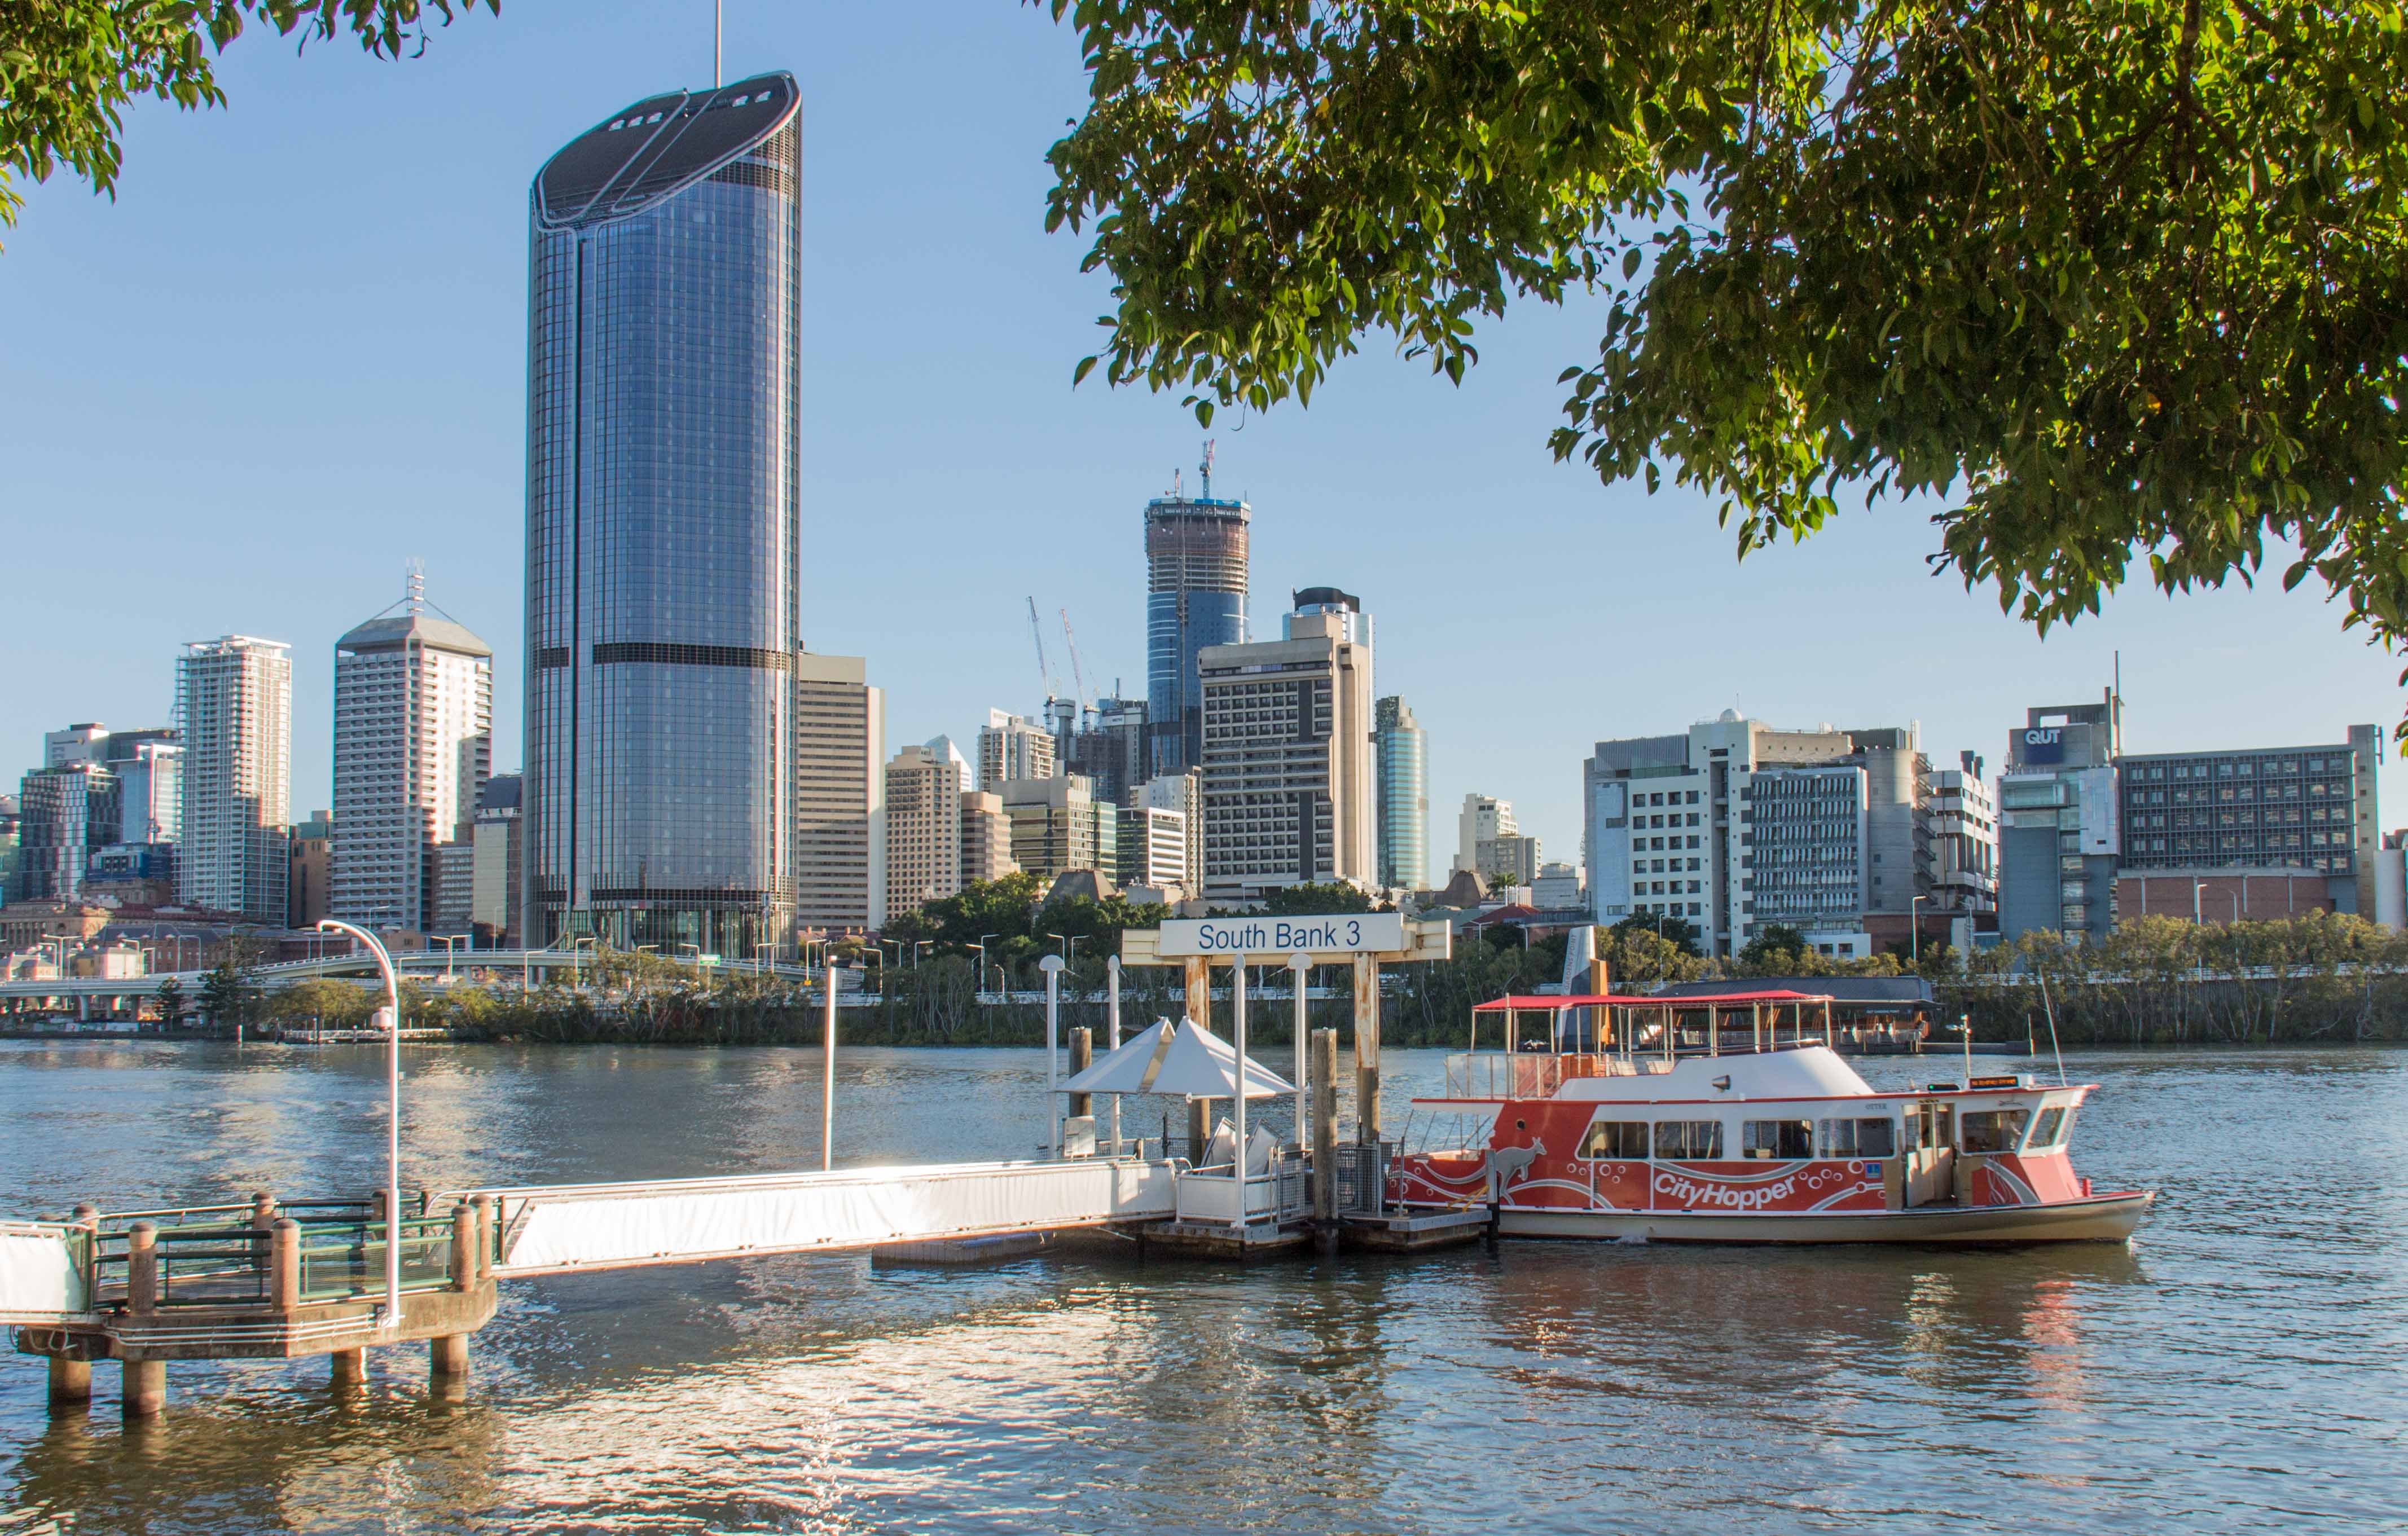 Explore Brisbane on a budget with a free CityHopper ferry